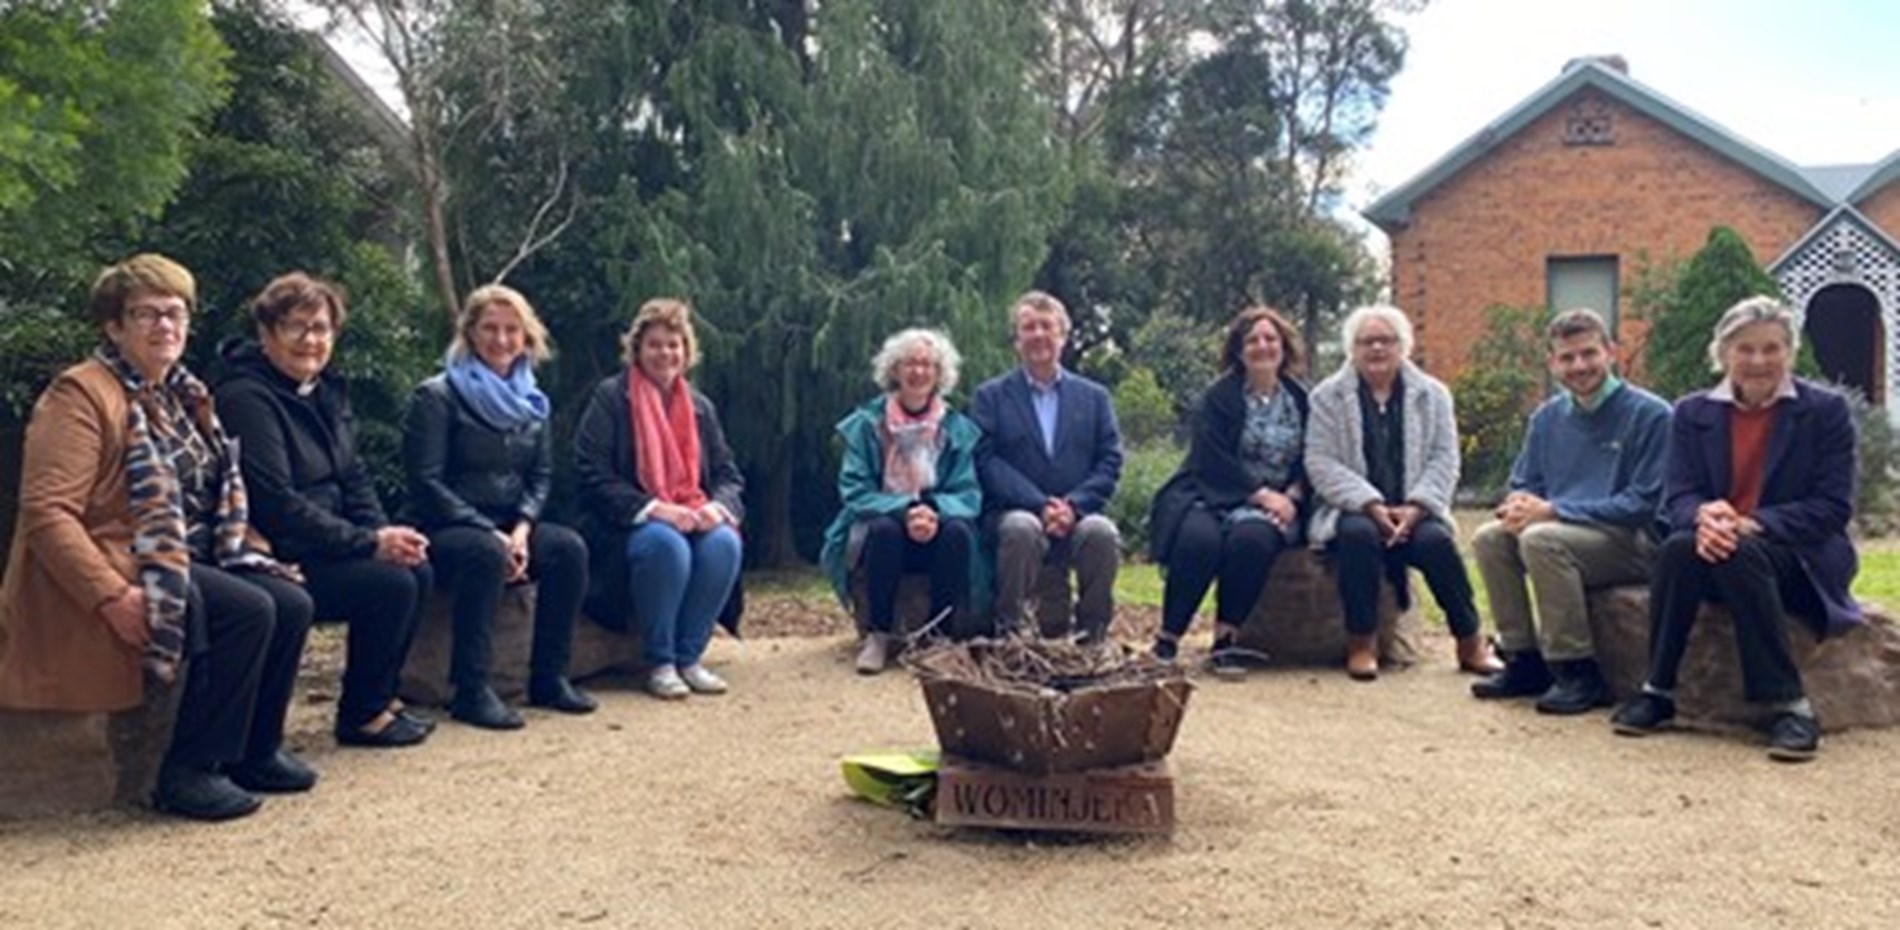 St Margaret’s Anglican Church opens the Yarning Circle – a gathering place Main Image